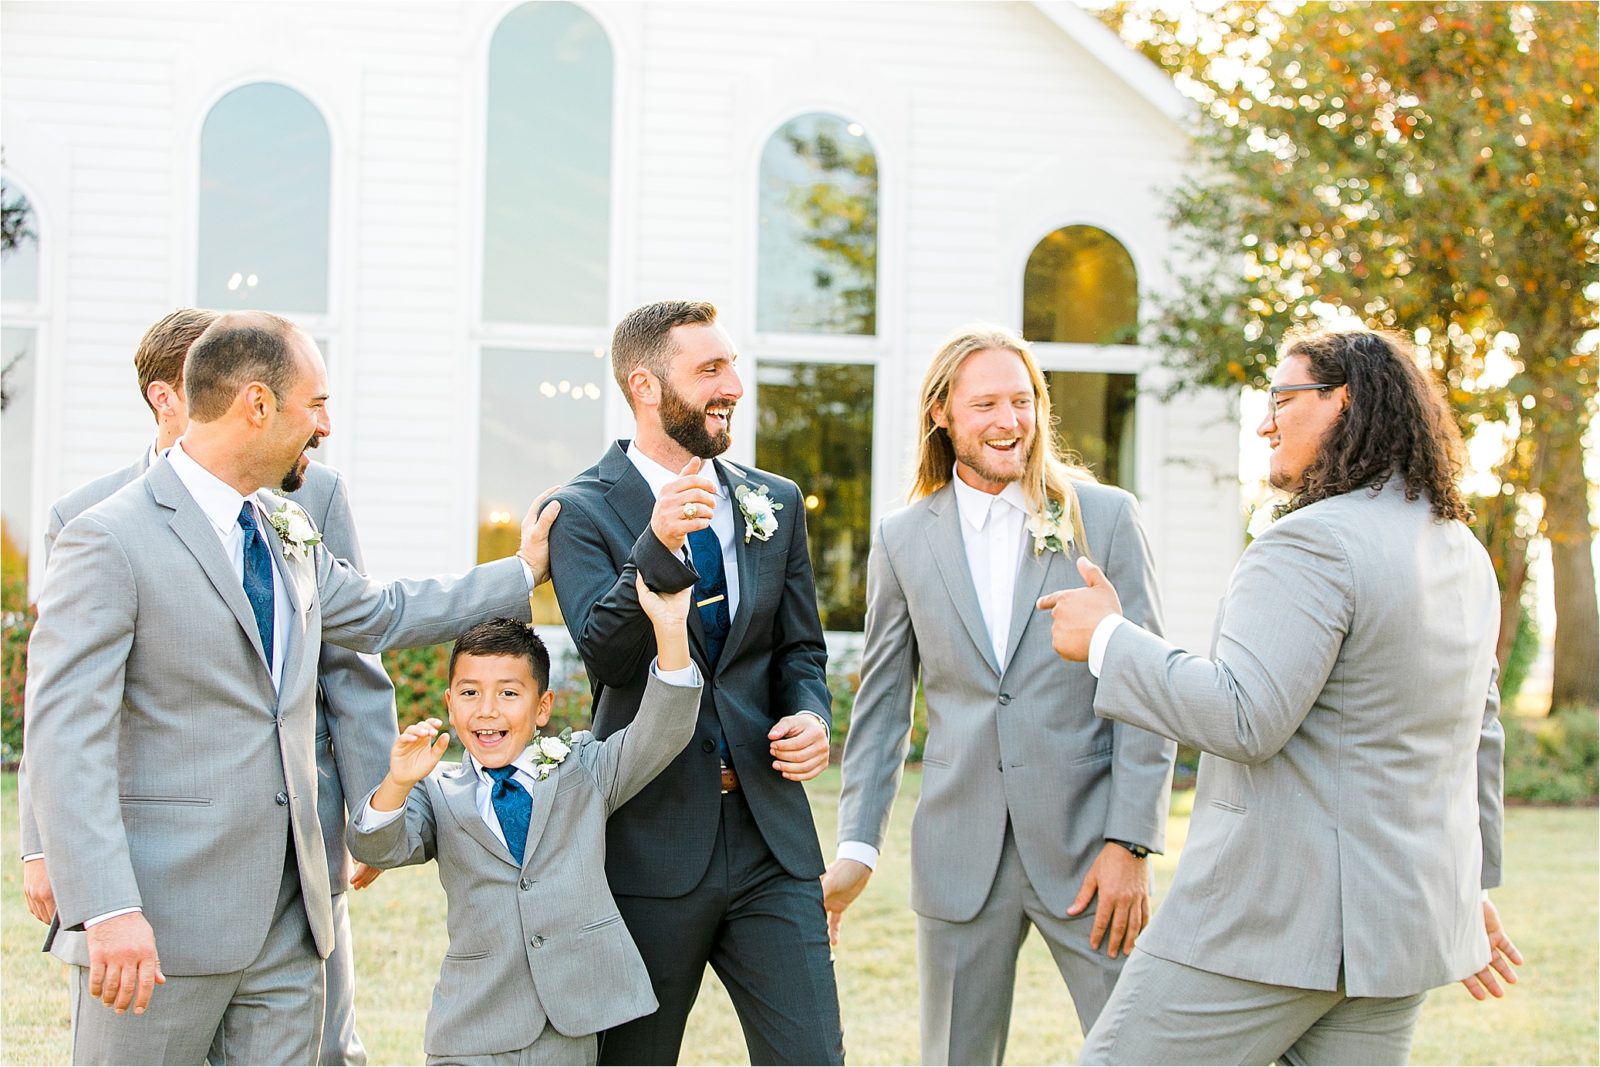 A groom and his groomsmen joke around with each other before the groom walks down the aisle at a White Wedding Chapel in DFW